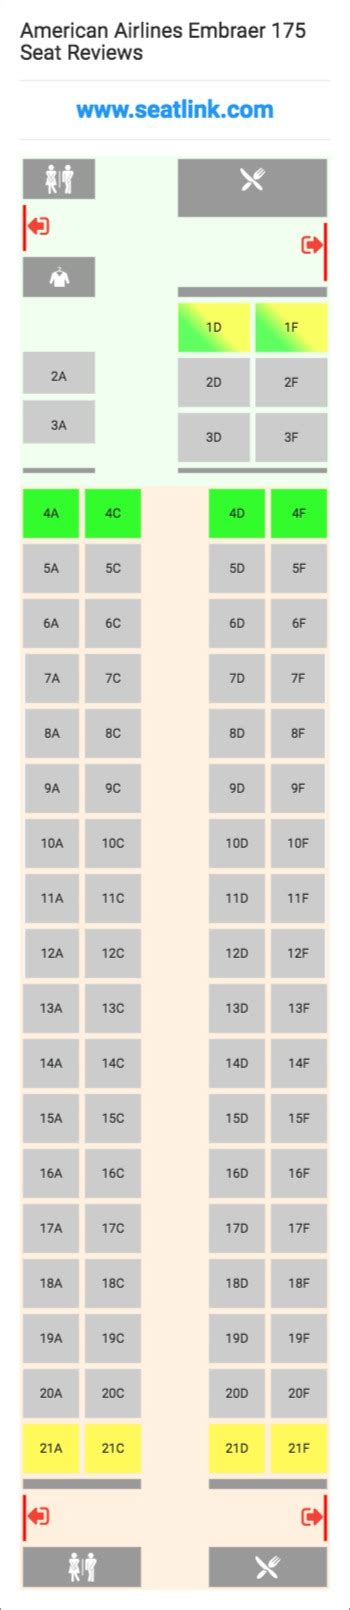 Since there is no bulkhead your feet extend far out not even touching the seat in front of you. hawaiian airlines seating chart | Bruin Blog